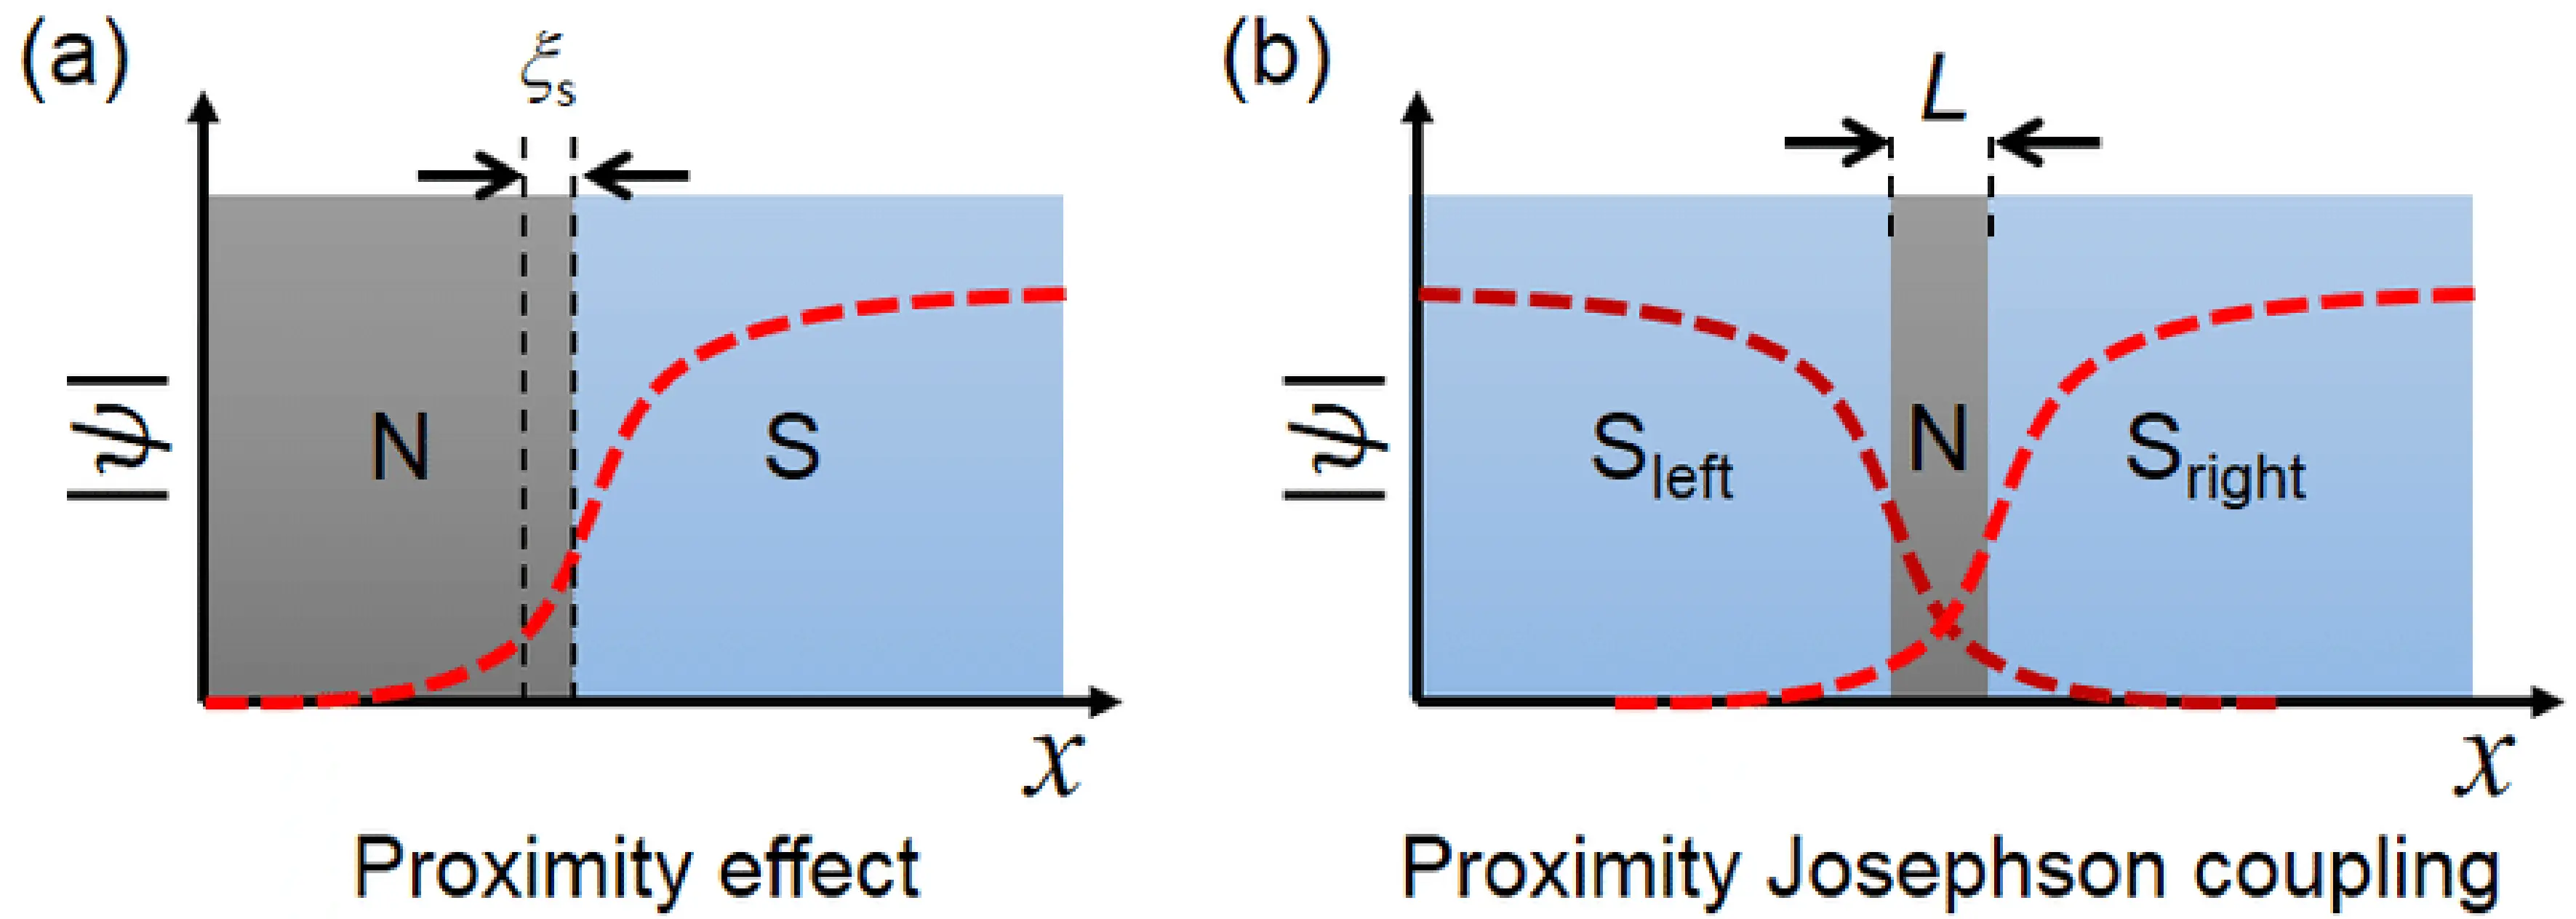 (a) The superconducting order parameter \Psi of a superconductor (S) penetrating into the normal metal (N) with a length scale of the superconducting coherence length,\xi. (b) Order parameters from two sides have an overlap in N, producing proximity Josephson coupling.(Lee and Lee 2018)